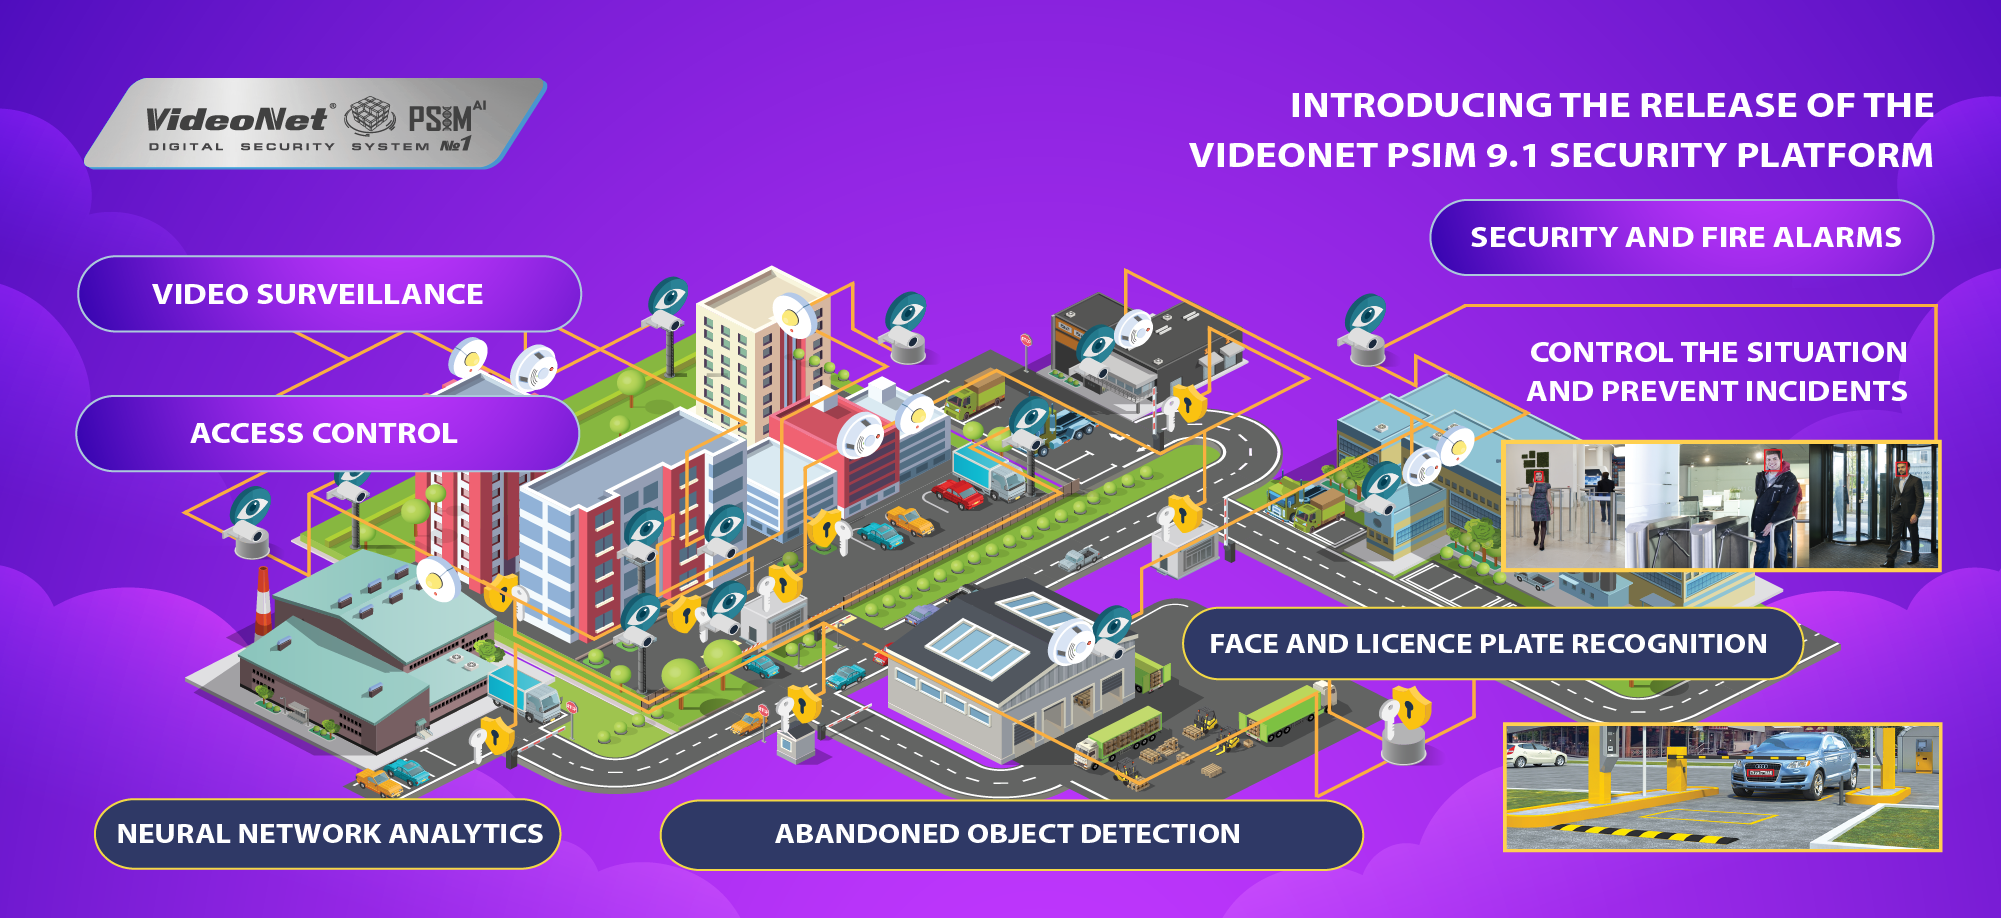 Introducing the release of the VideoNet PSIM 9.1